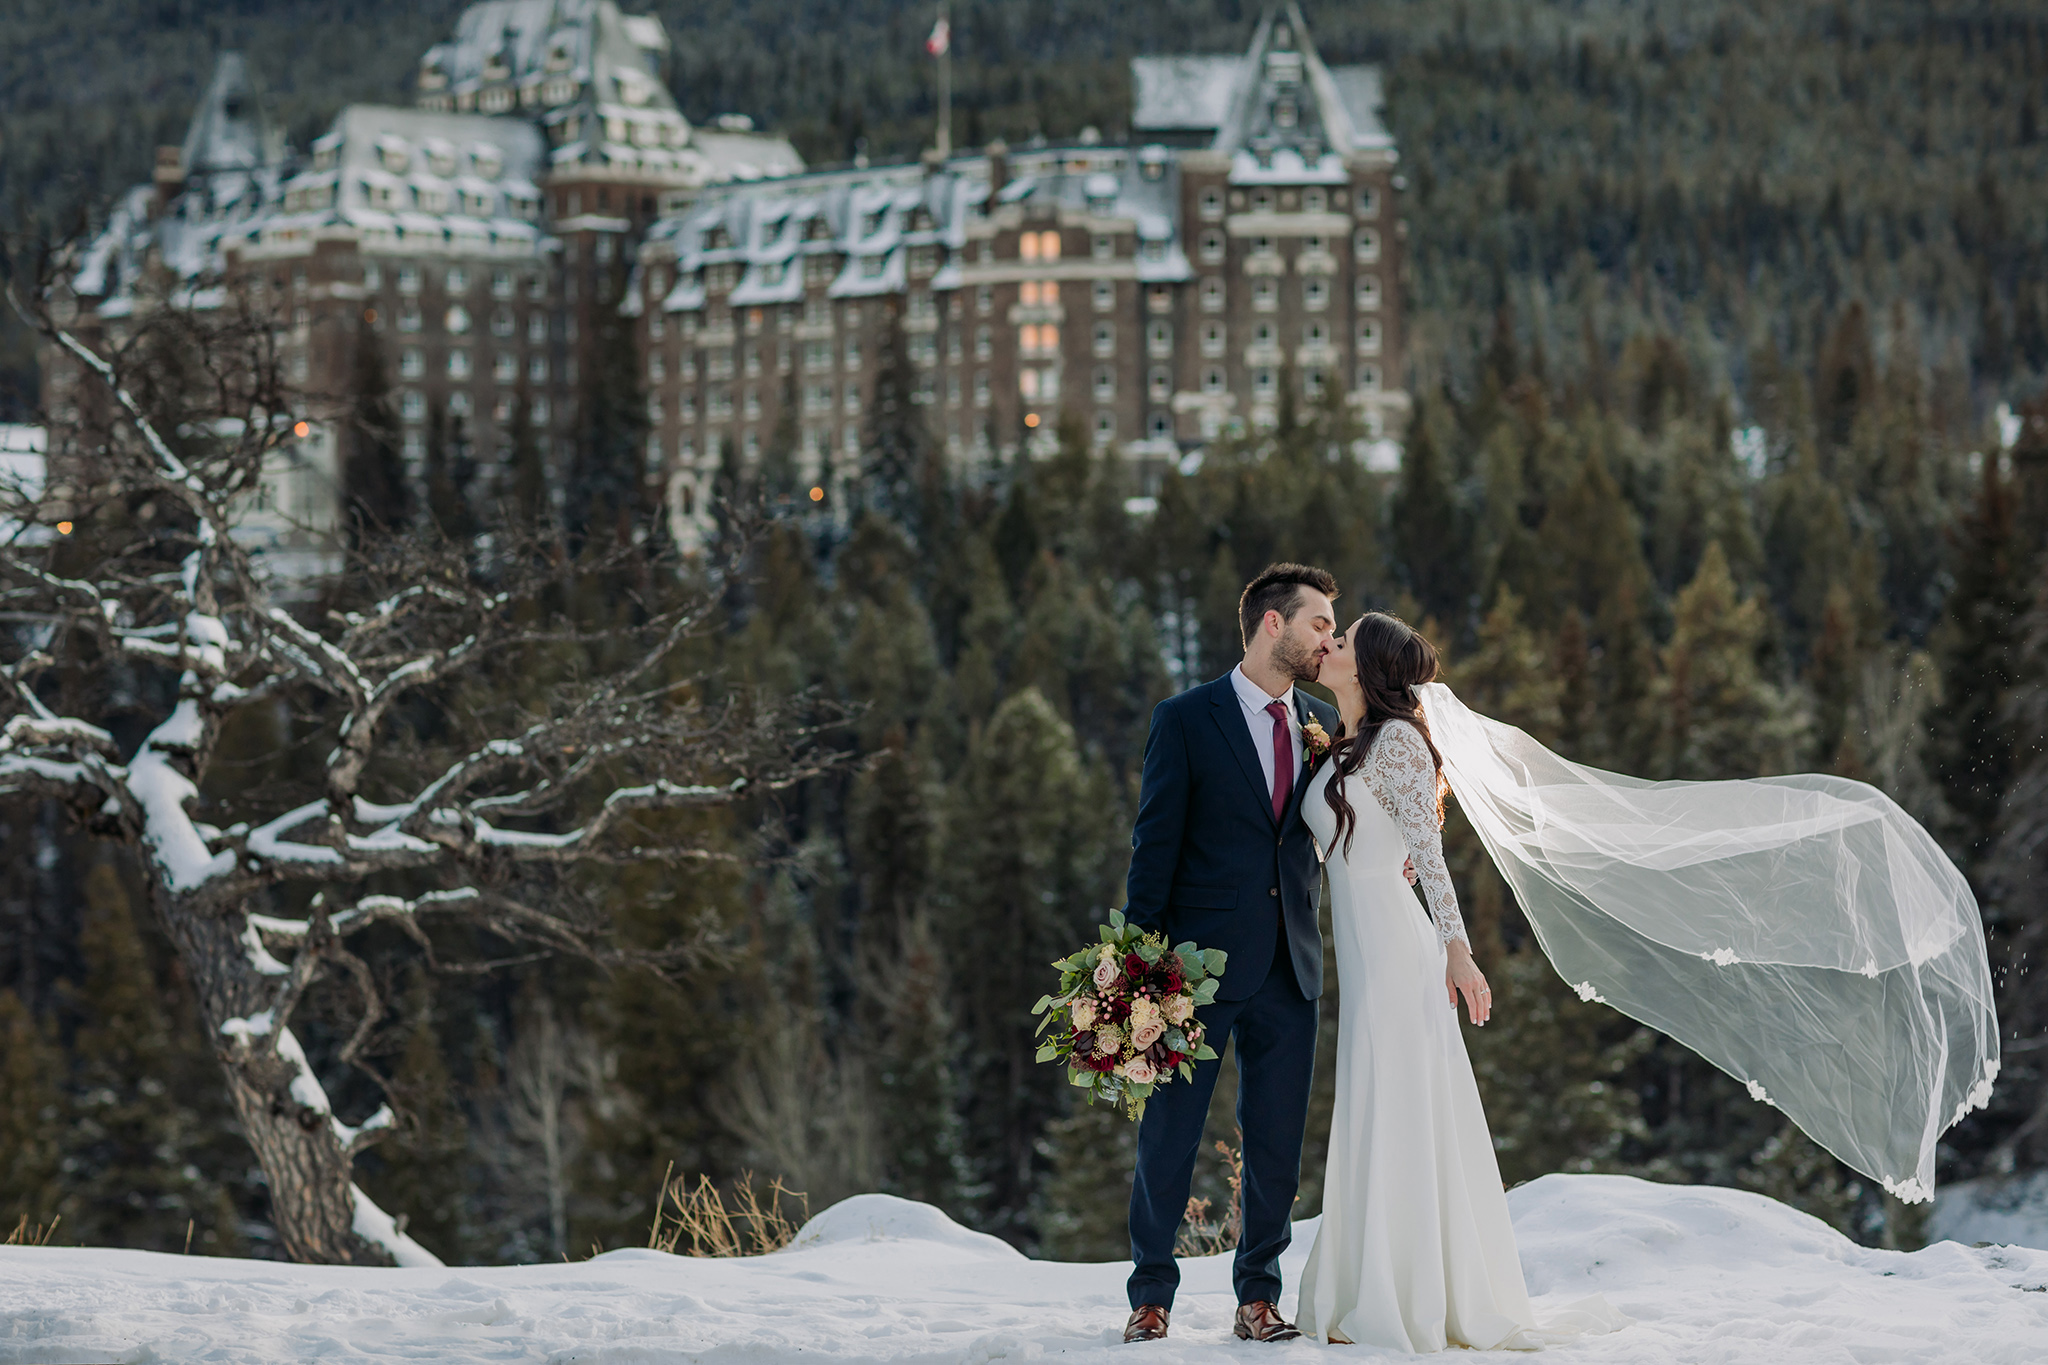 A Guide to Eloping in the Canadian Rockies | Mountain Wedding photographed by ENV Photography | Elegant winter wedding at Surprise corner in Banff with the Fairmont Banff Springs hotel in the distance.